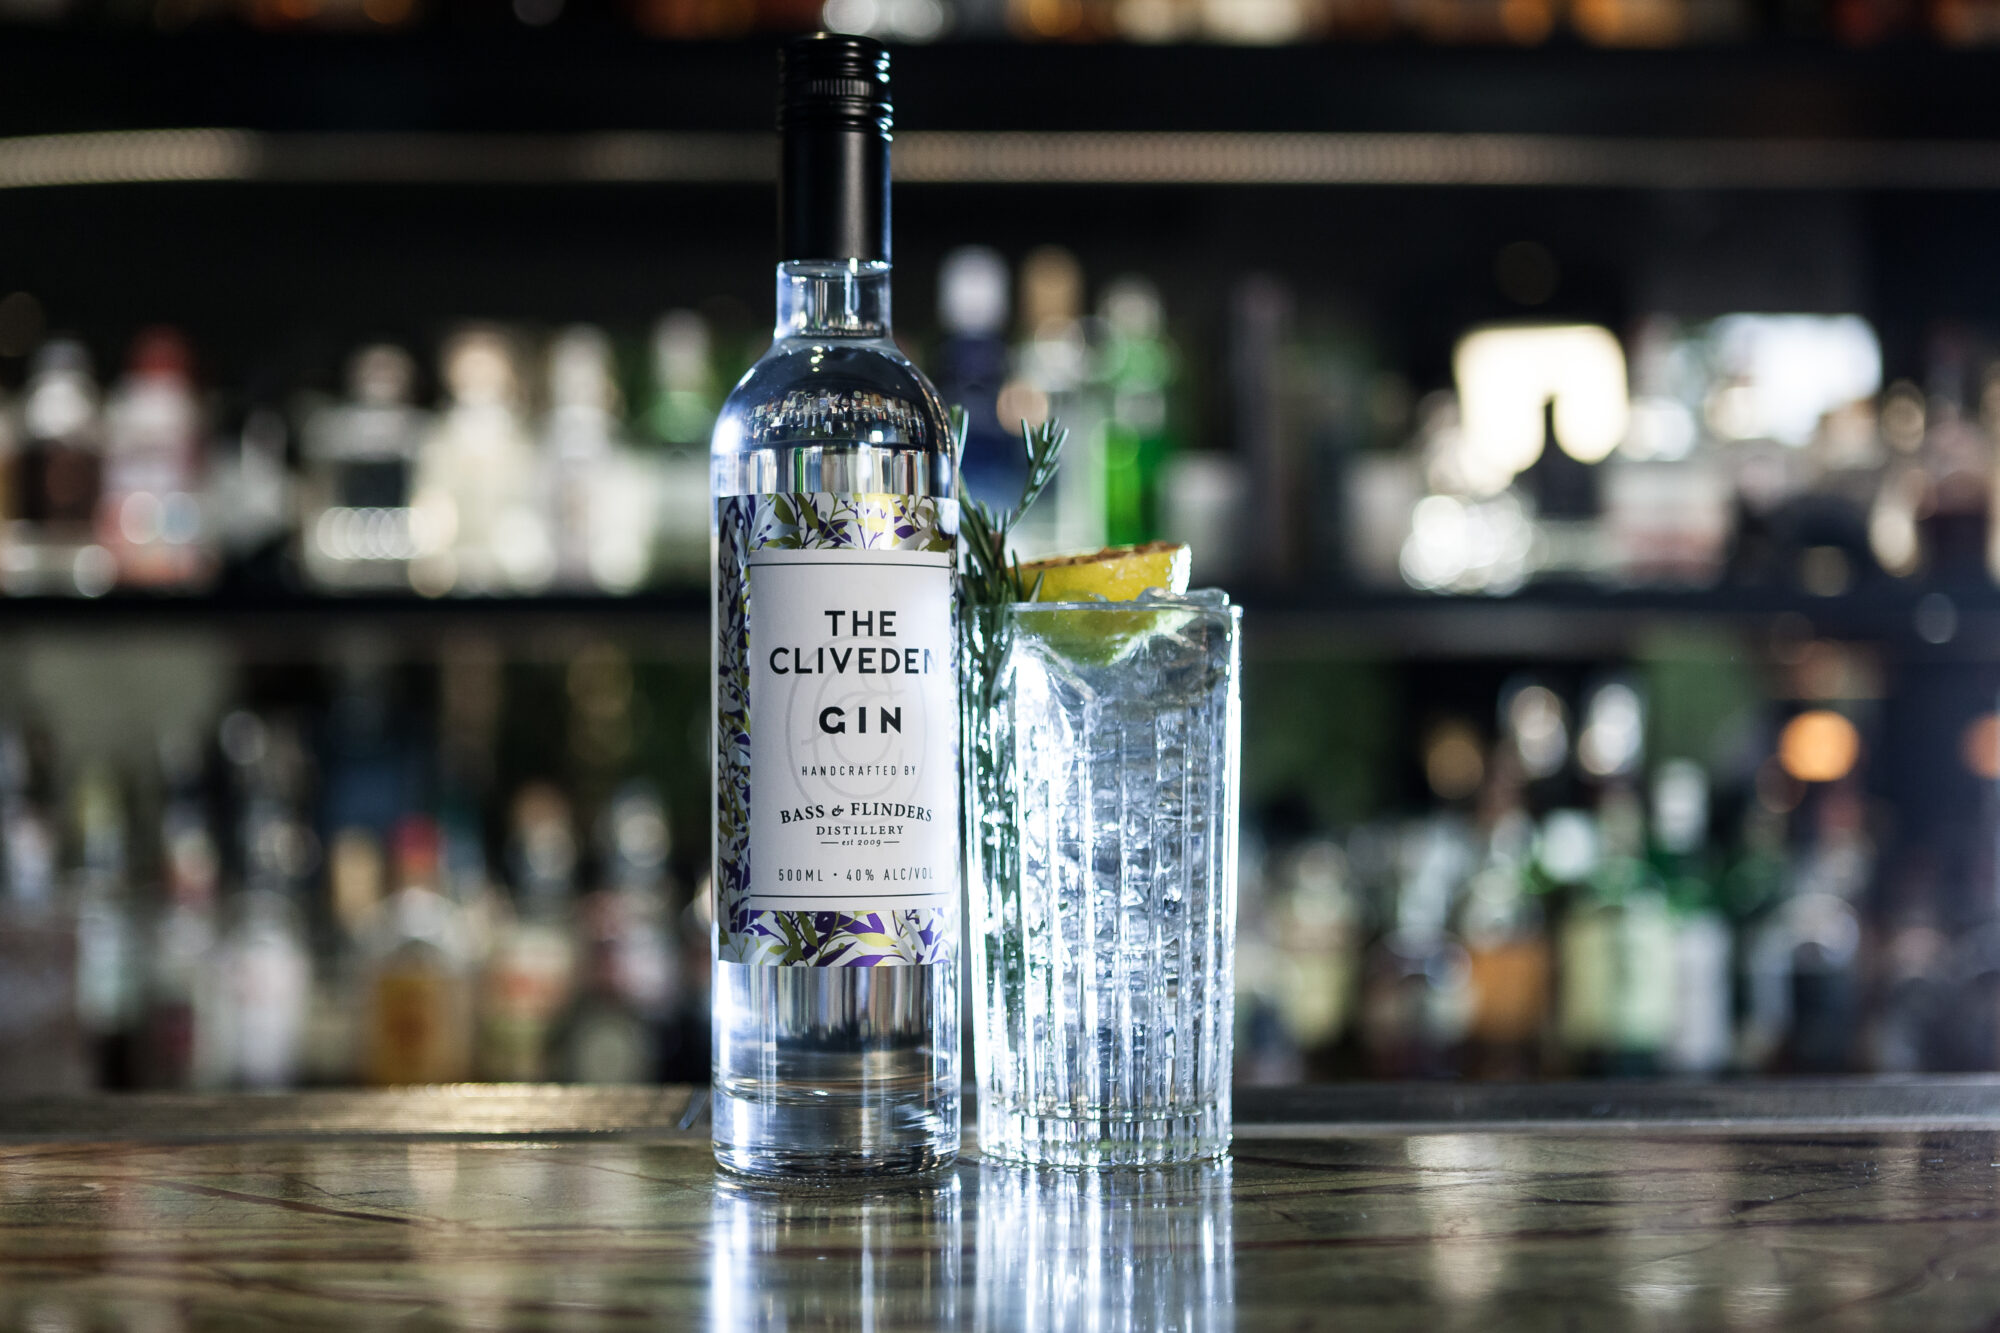 The Cliveden Gin